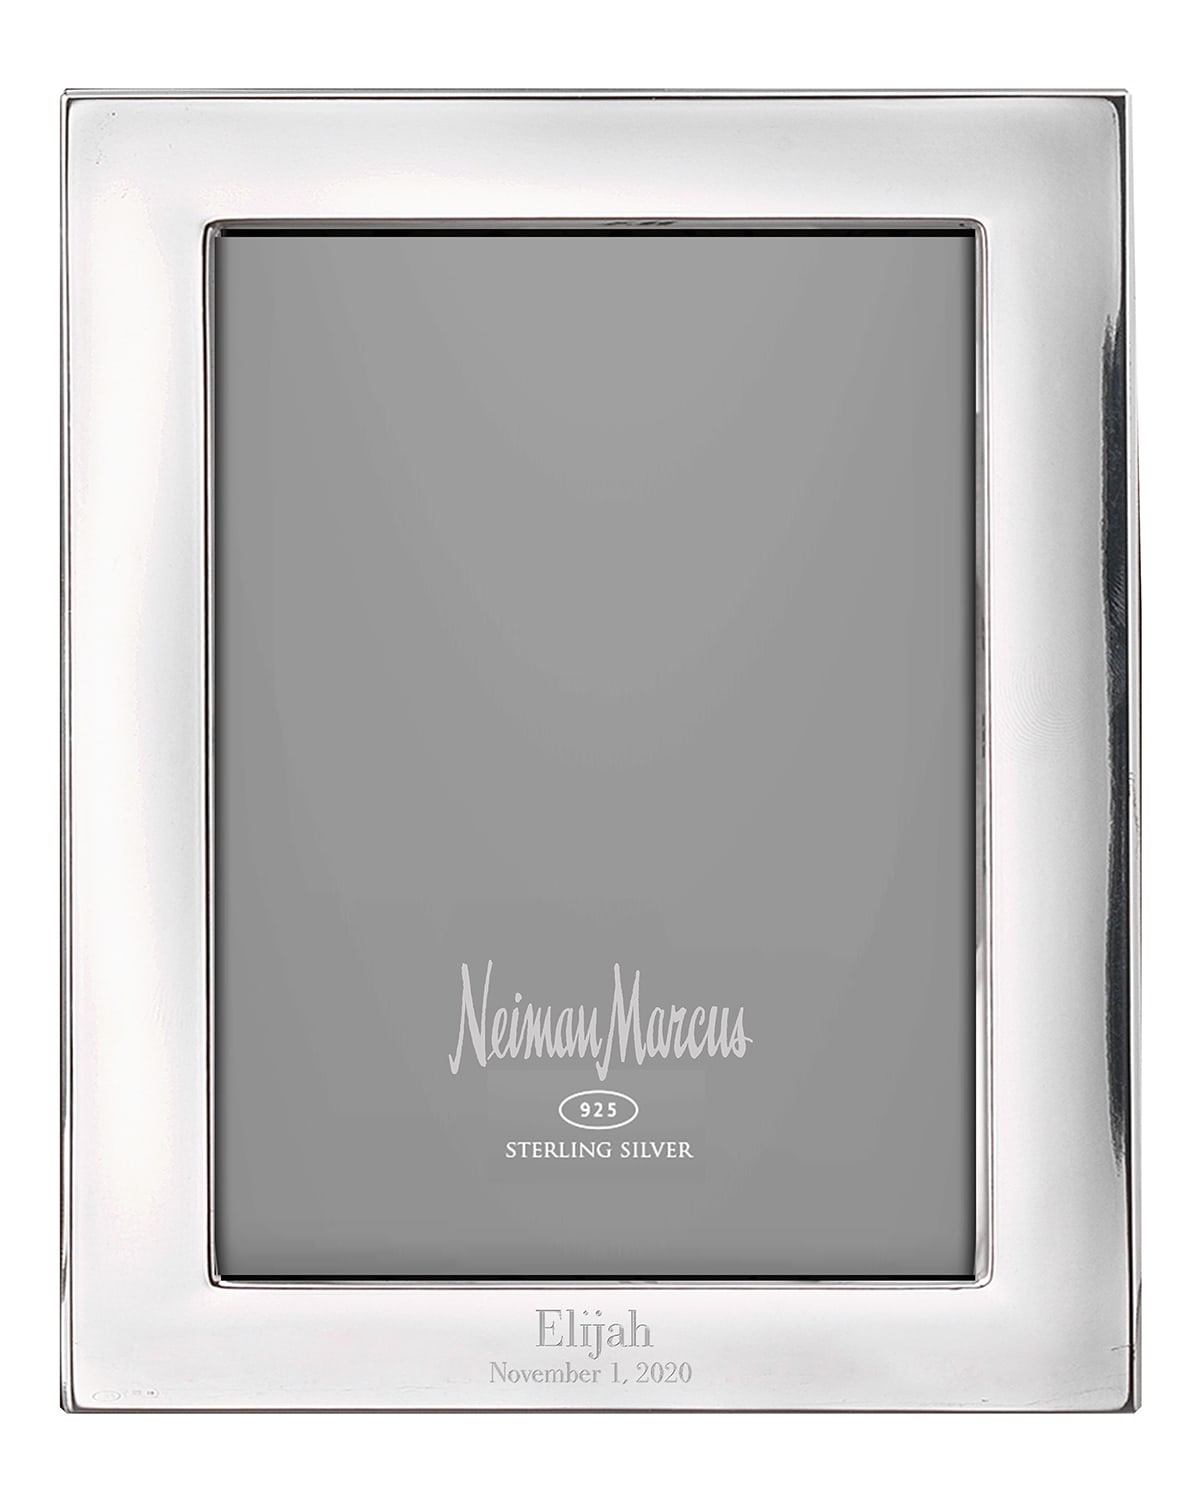 Cunill America Tiffany Plain Personalized Frame, 4" X 6" In Silver Block Font